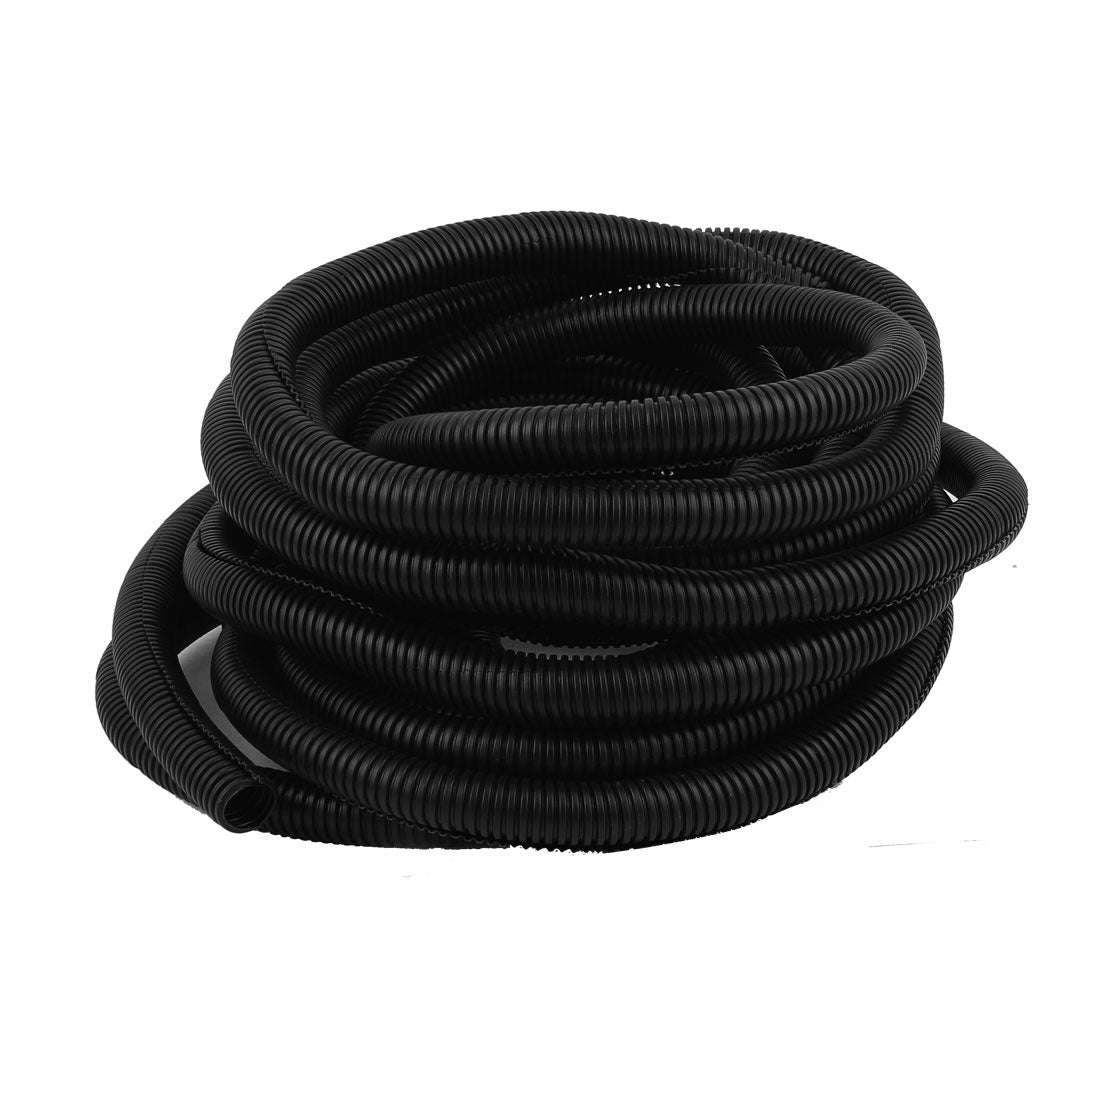 uxcell Uxcell 10 M 17 x 20 mm Plastic Split Corrugated Conduit Tube for Garden,Office Black